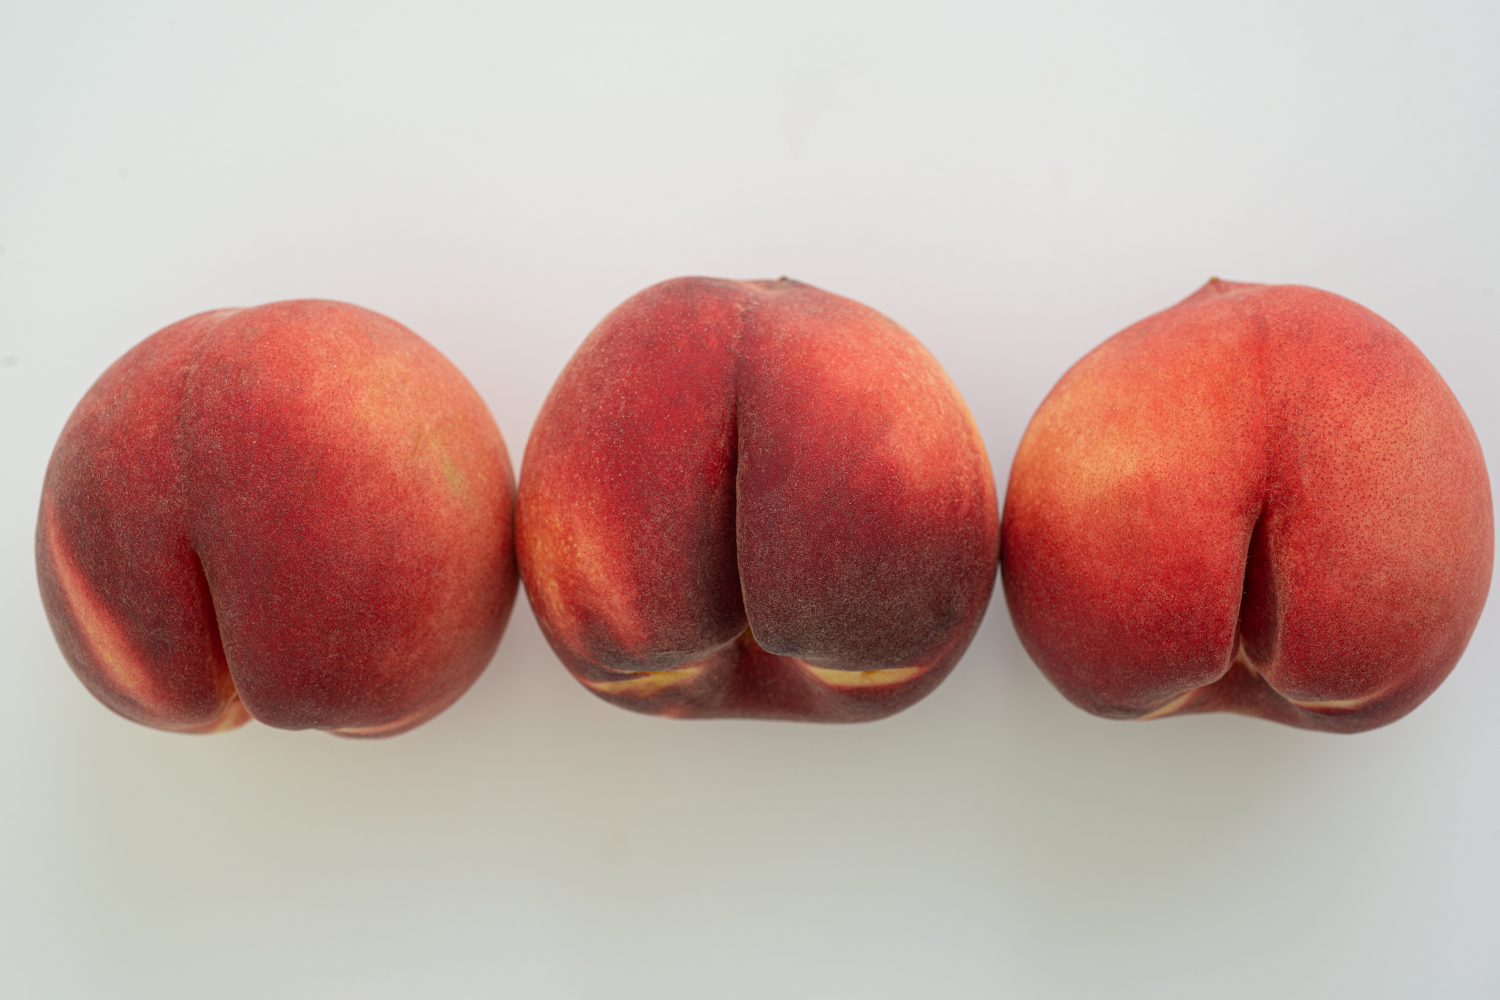 A row of three peaches on a white background. (anal sex concept)